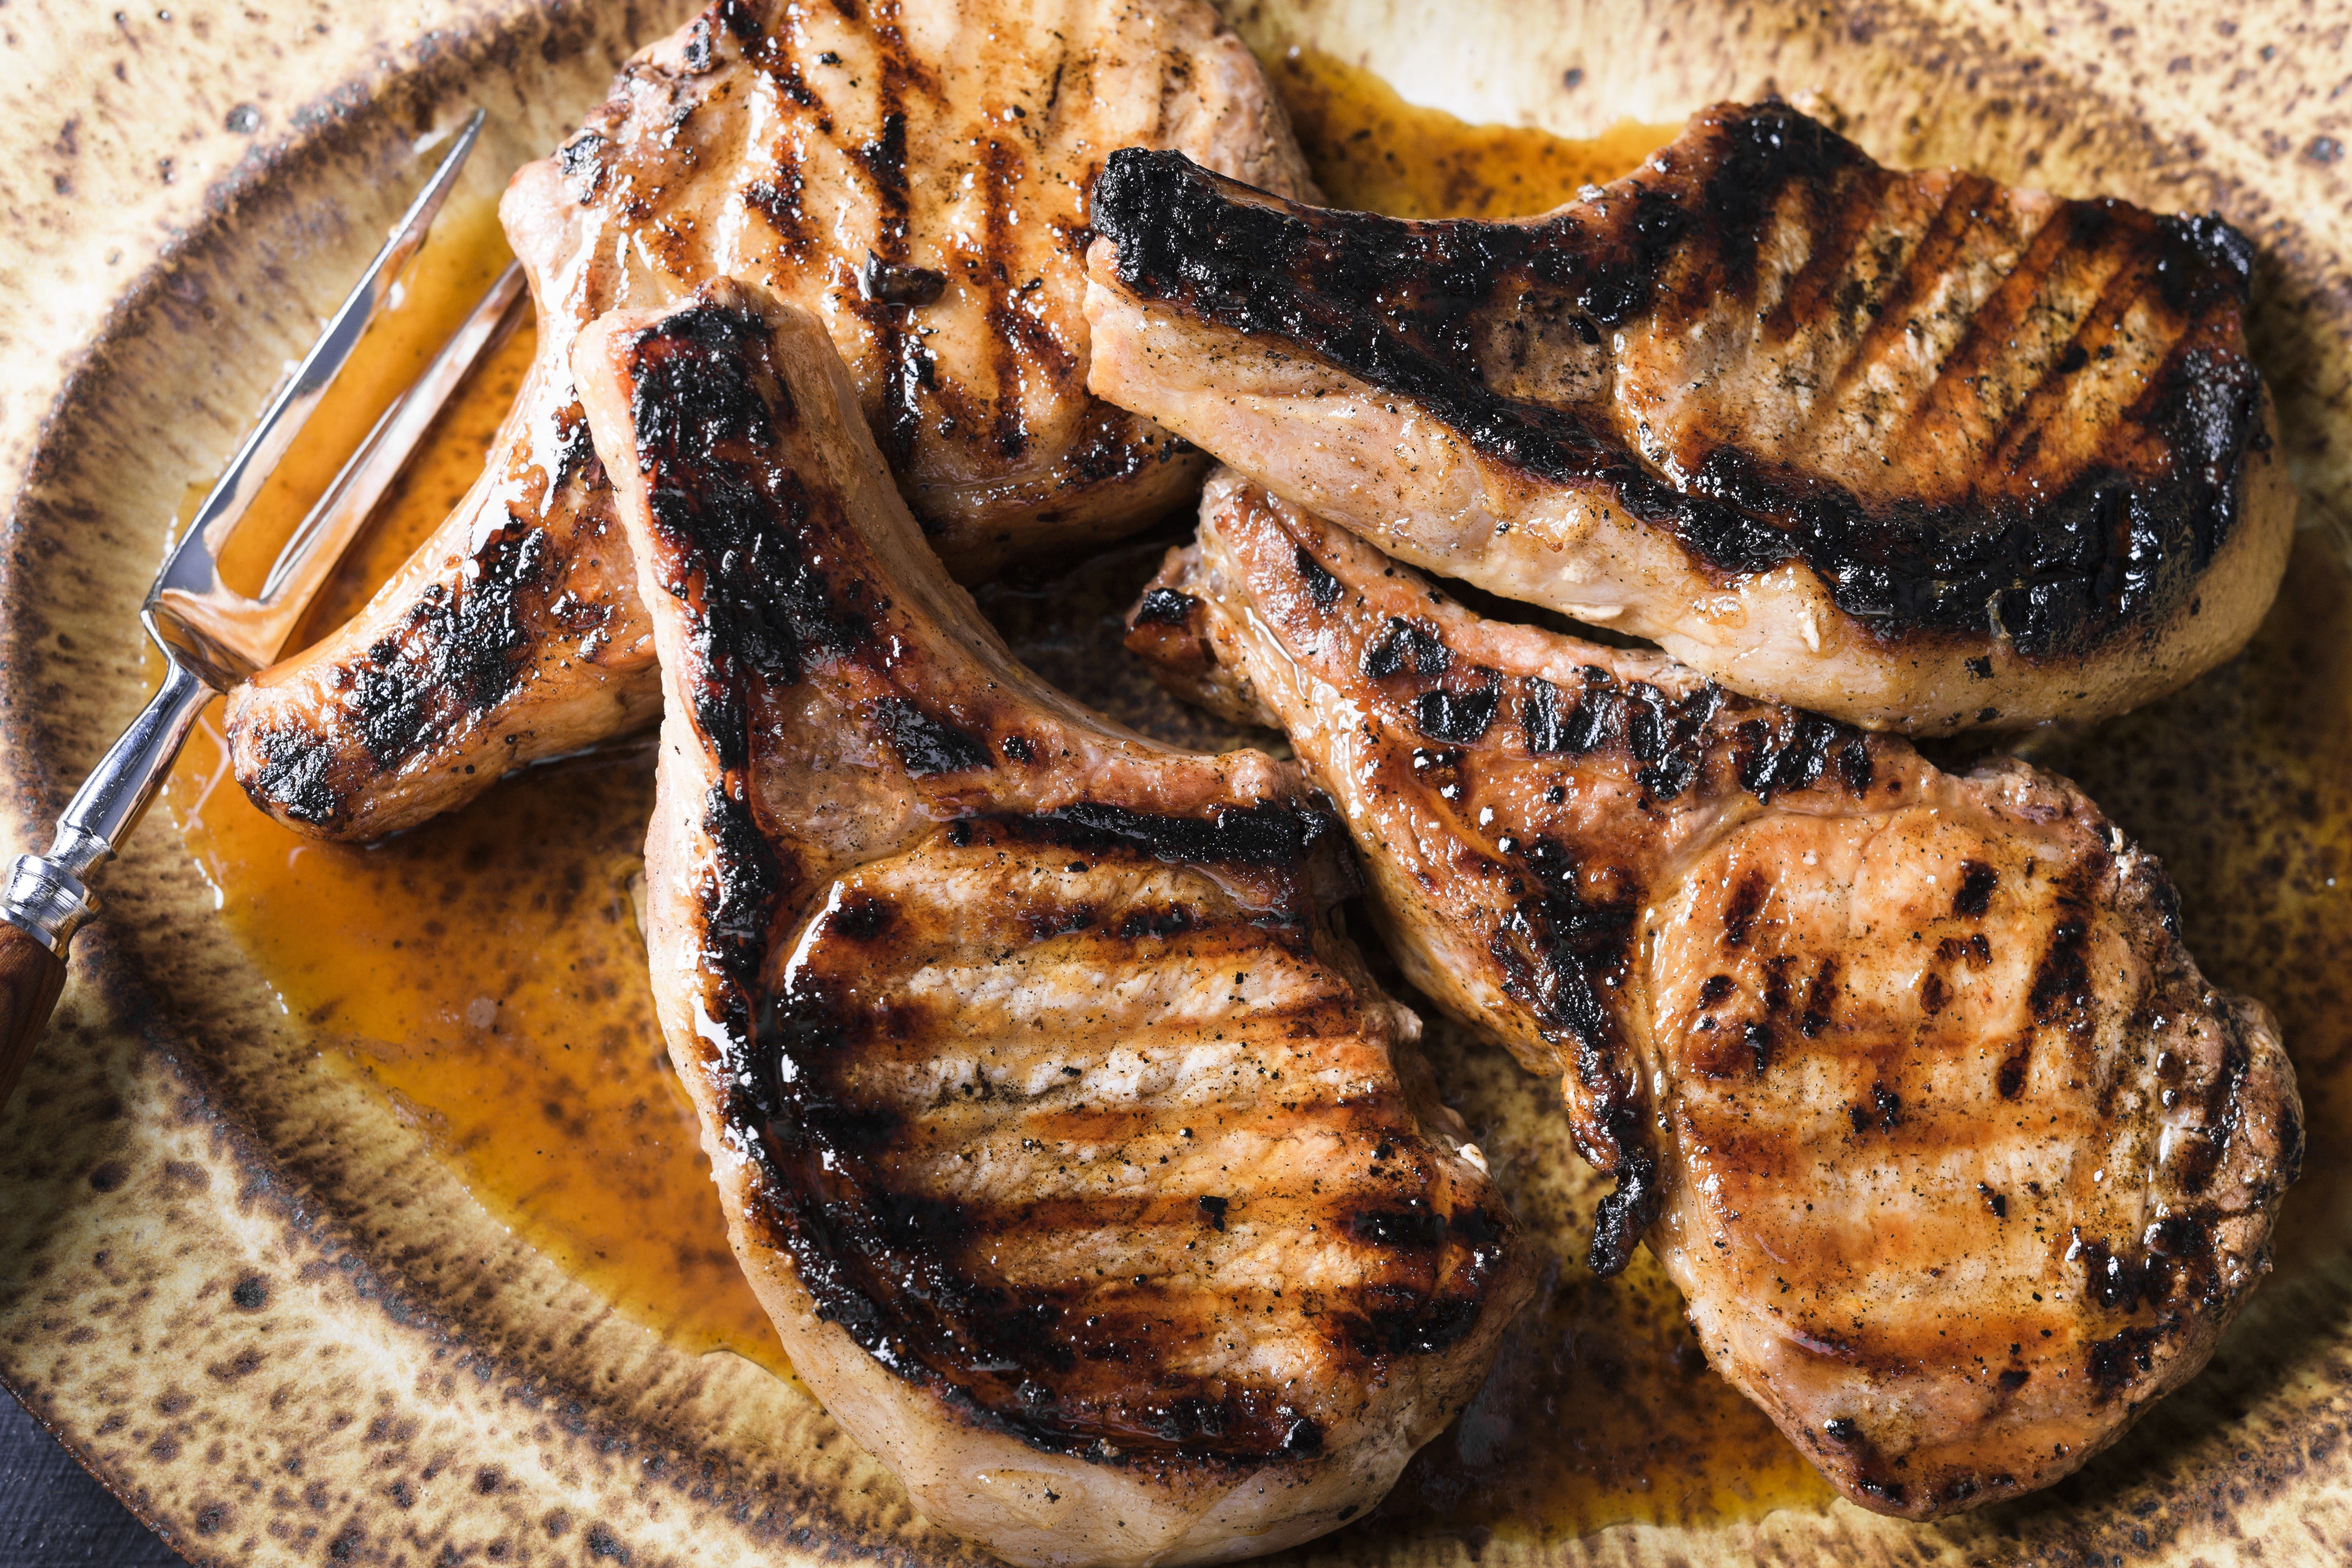 Grill Smoked Pork Chops With Brown Sugar And Cider Vinegar Gastrique Christopher Kimball S Milk Street,Thai Food Recipes